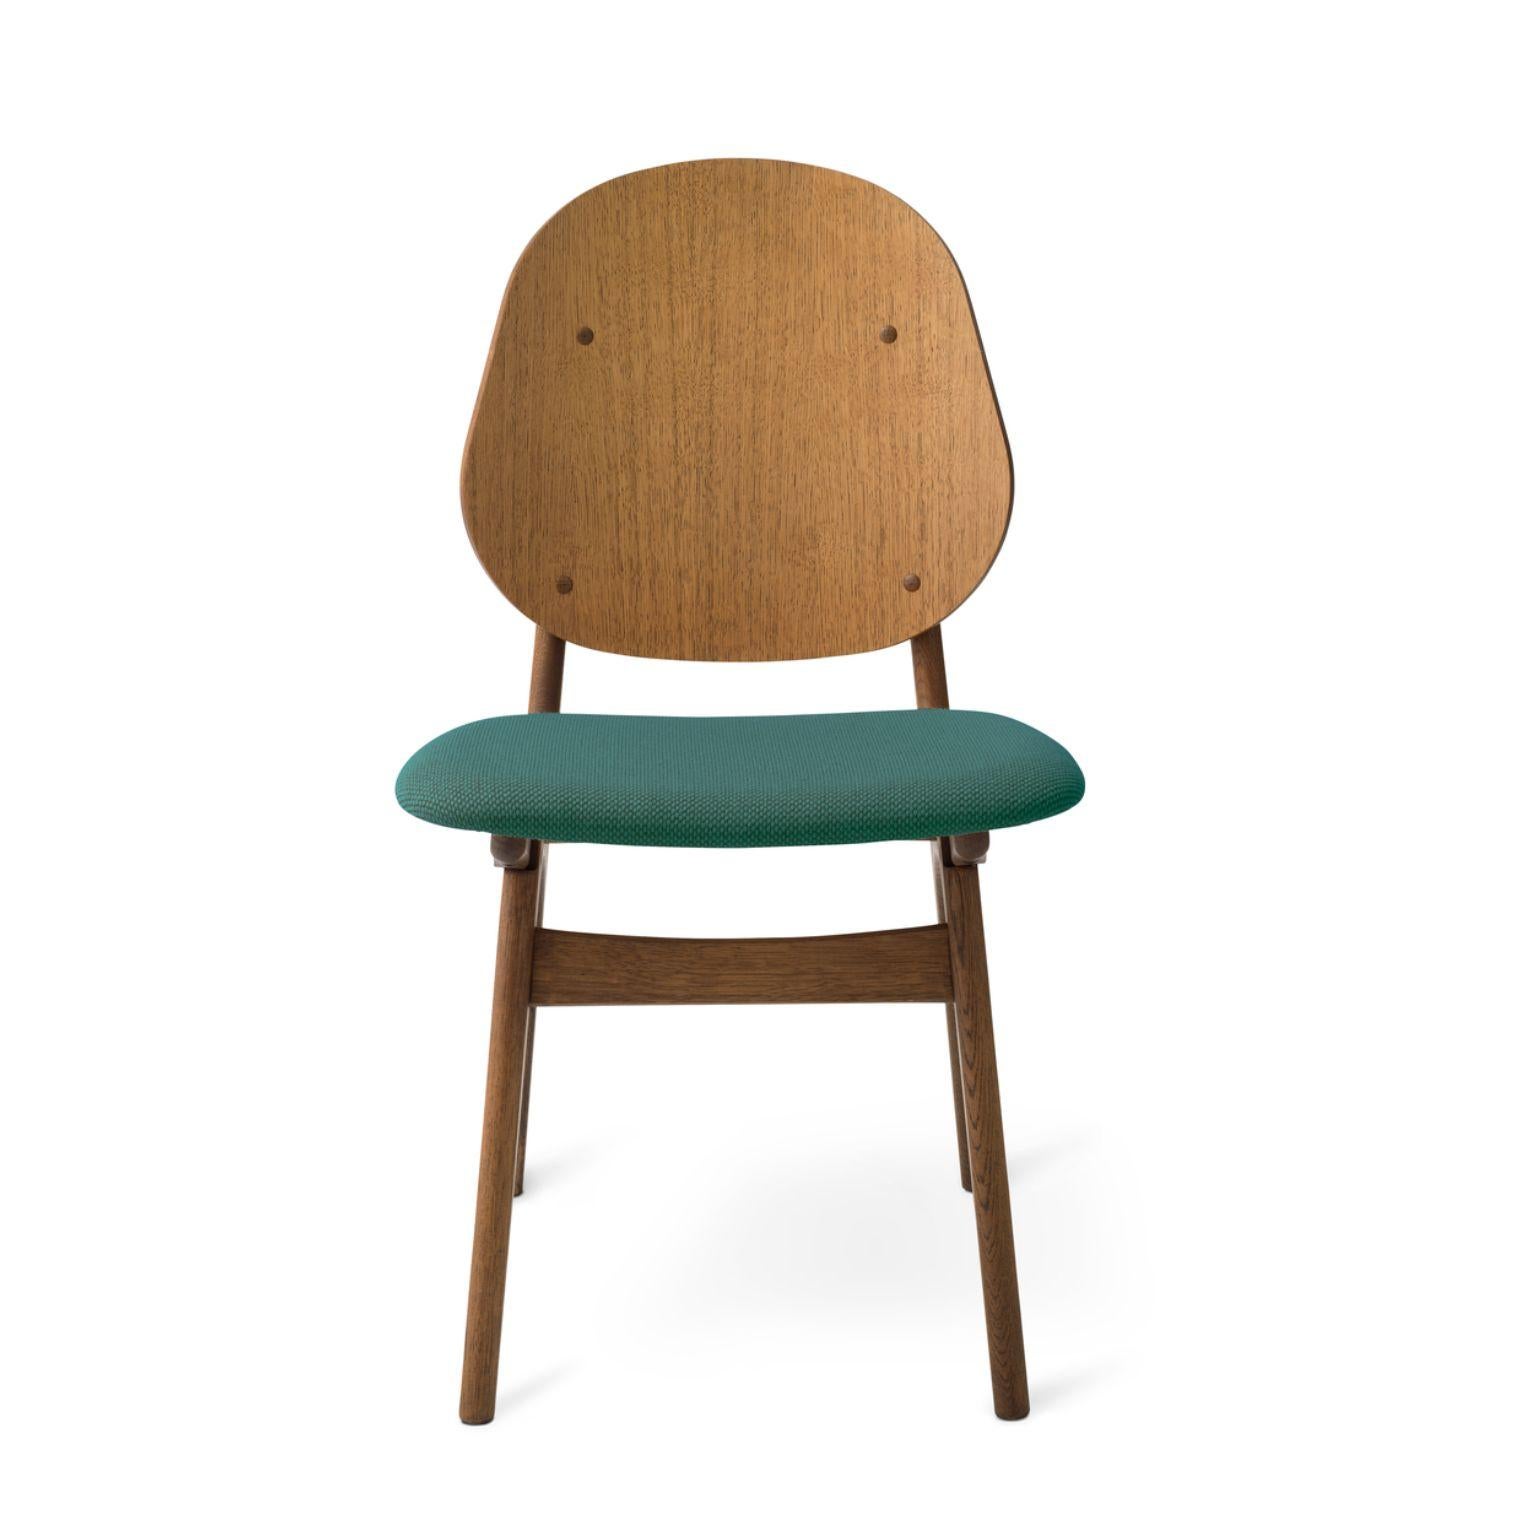 Noble chair teak oiled oak dark cyan by Warm Nordic
Dimensions: D 55 x W 47 x H 85 cm
Material: Teak oiled solid oak, Veneer seat and back, Textile upholstery.
Weight: 7.5 kg
Also available in different colours and finishes.

An elegant and